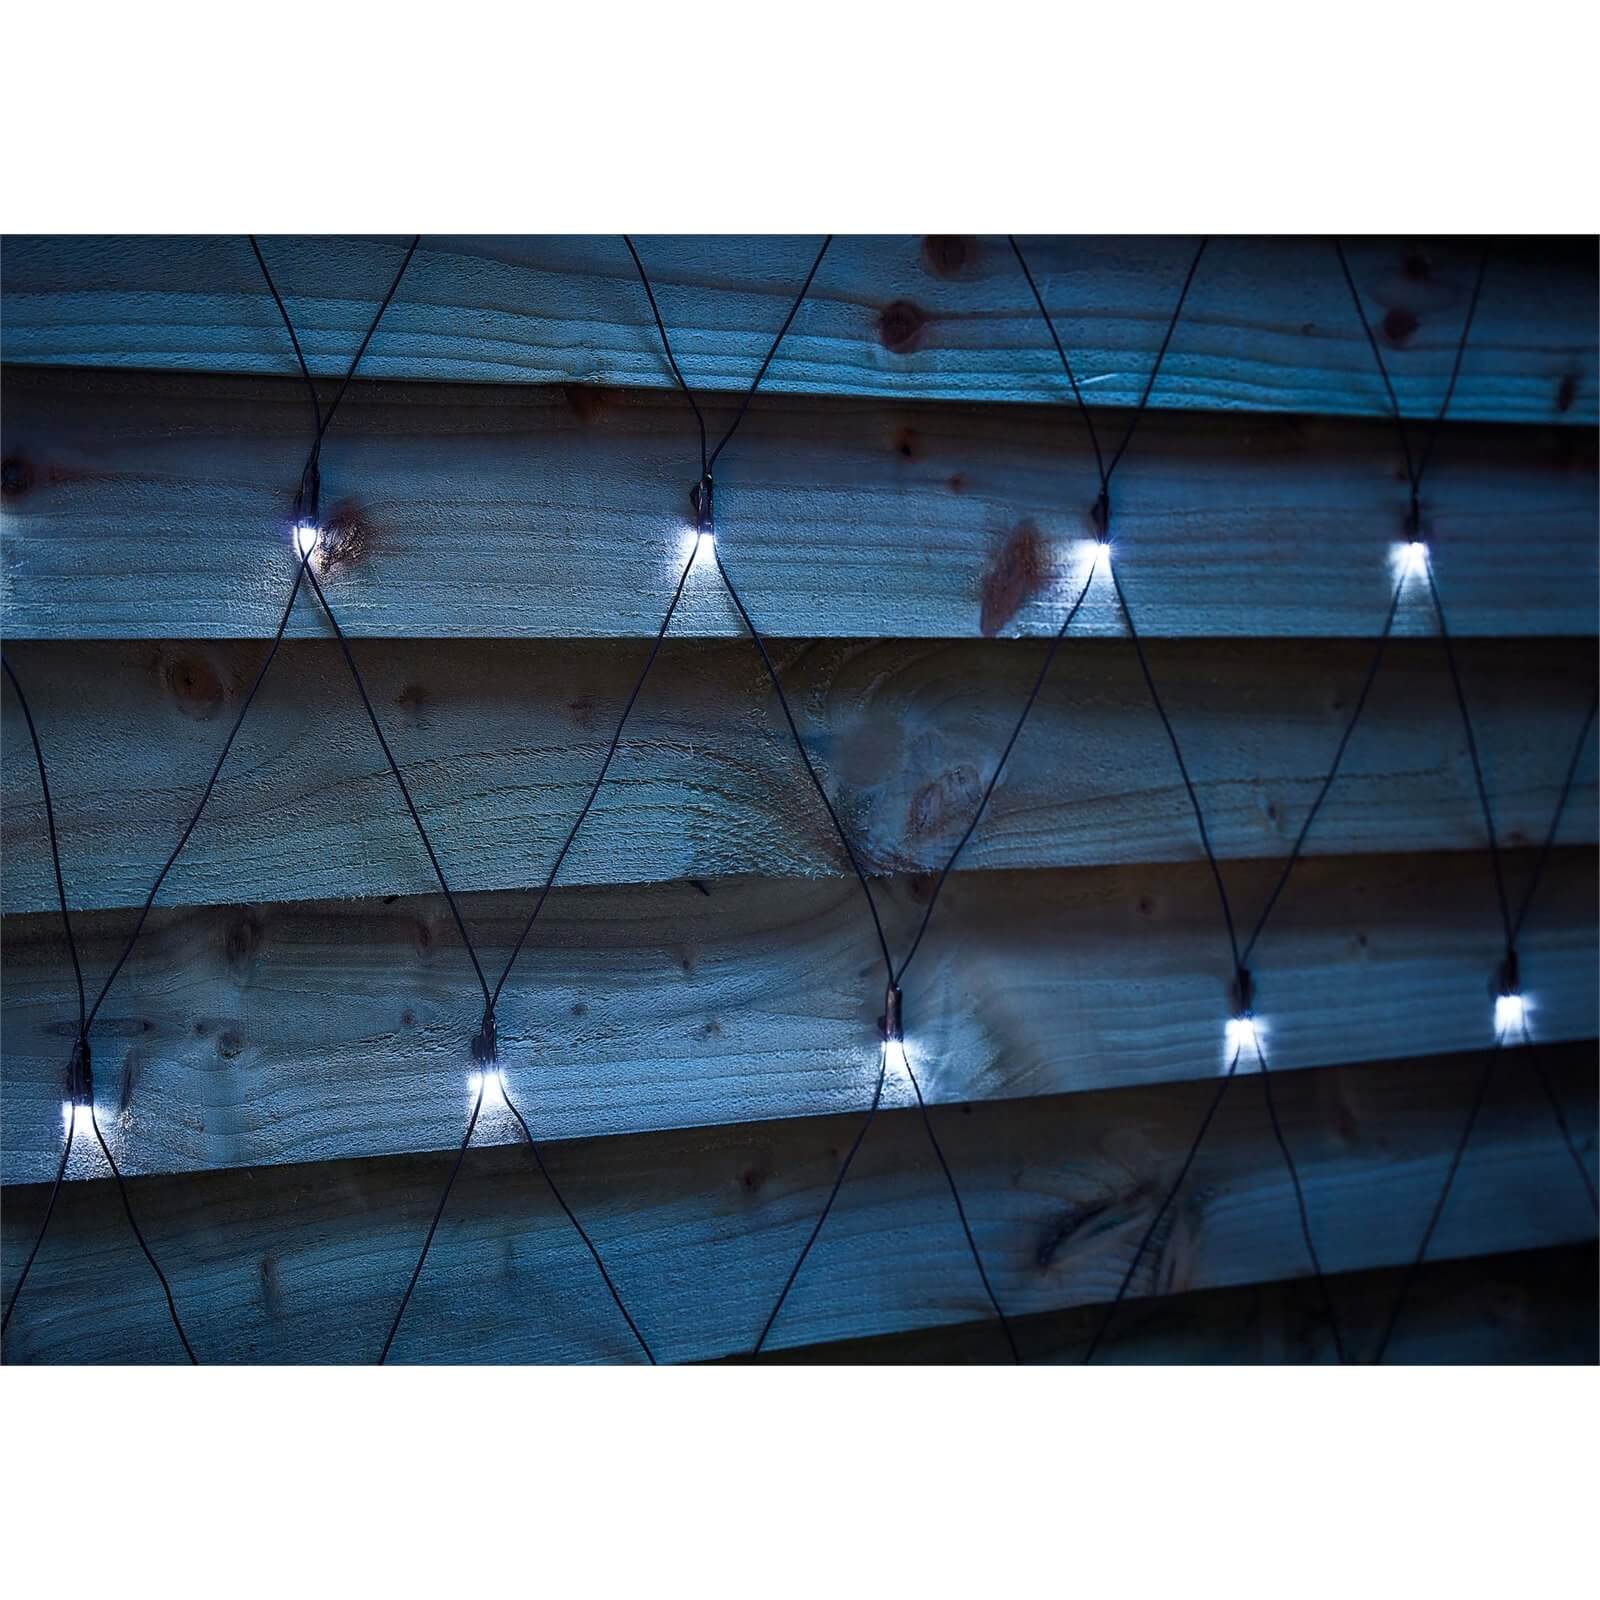 3 x 2m Timer LED Outdoor Net Light - Bright White (Battery Operated)